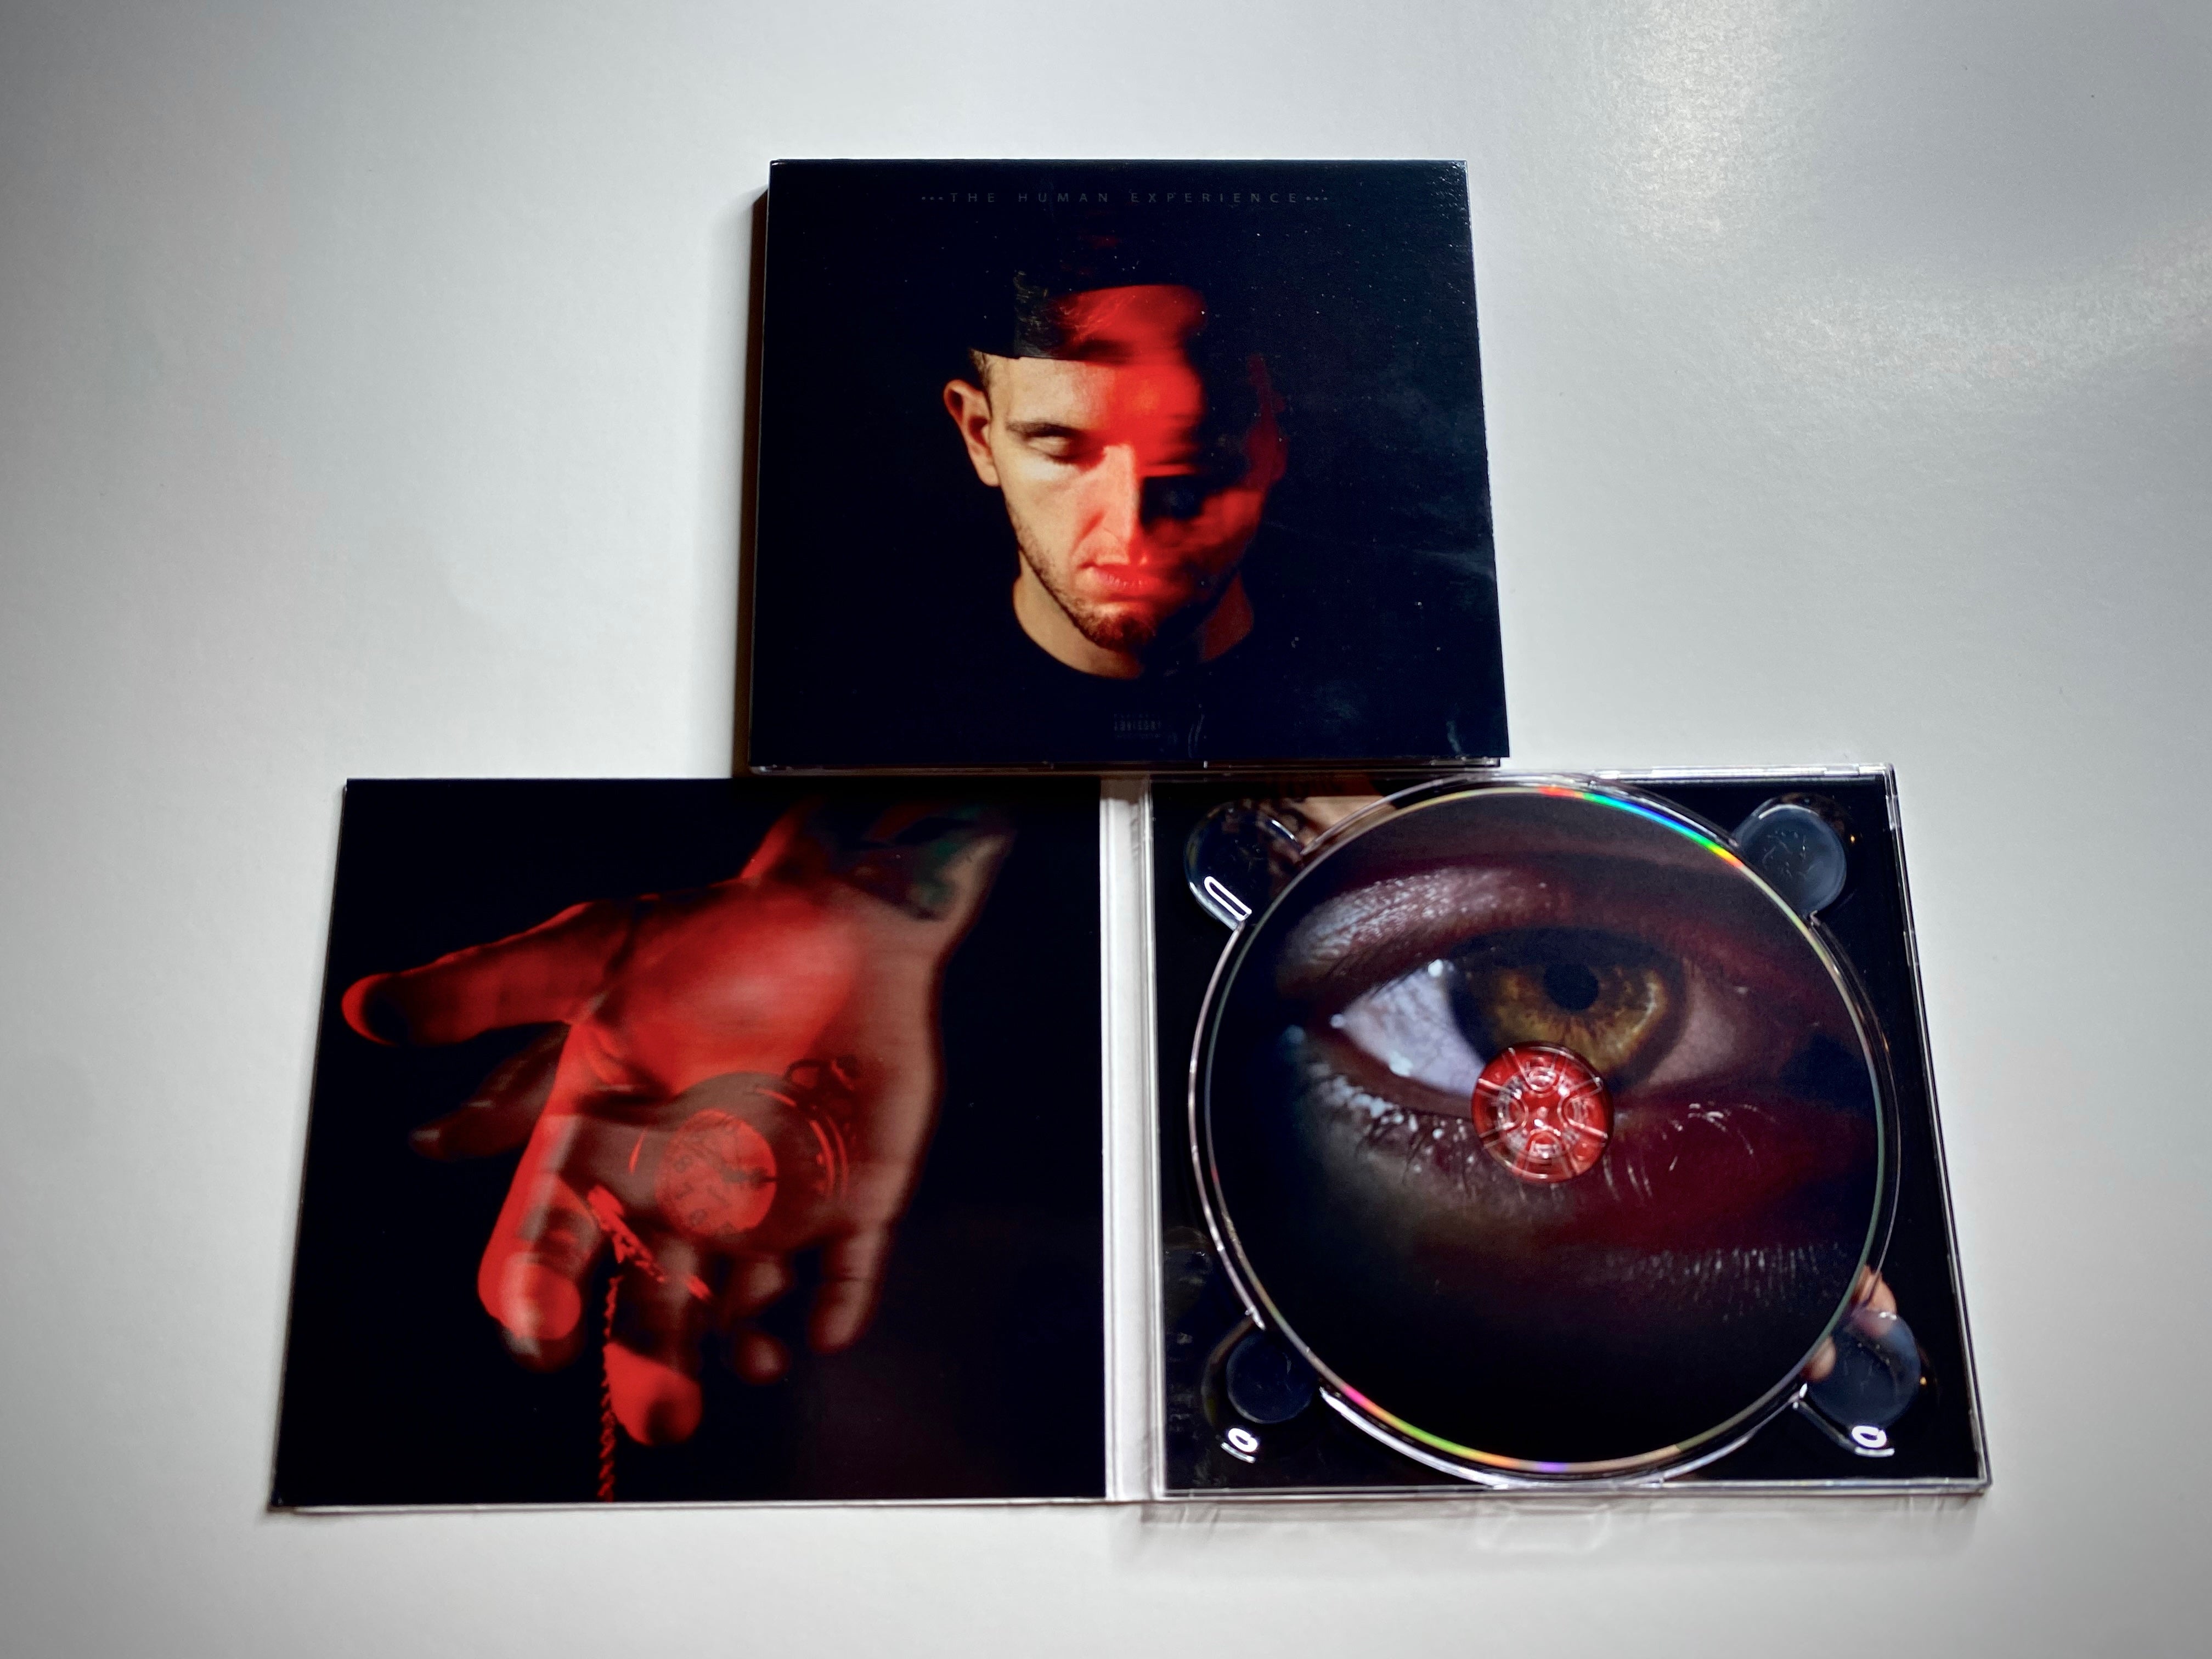 "The Human Experience" Physical CD